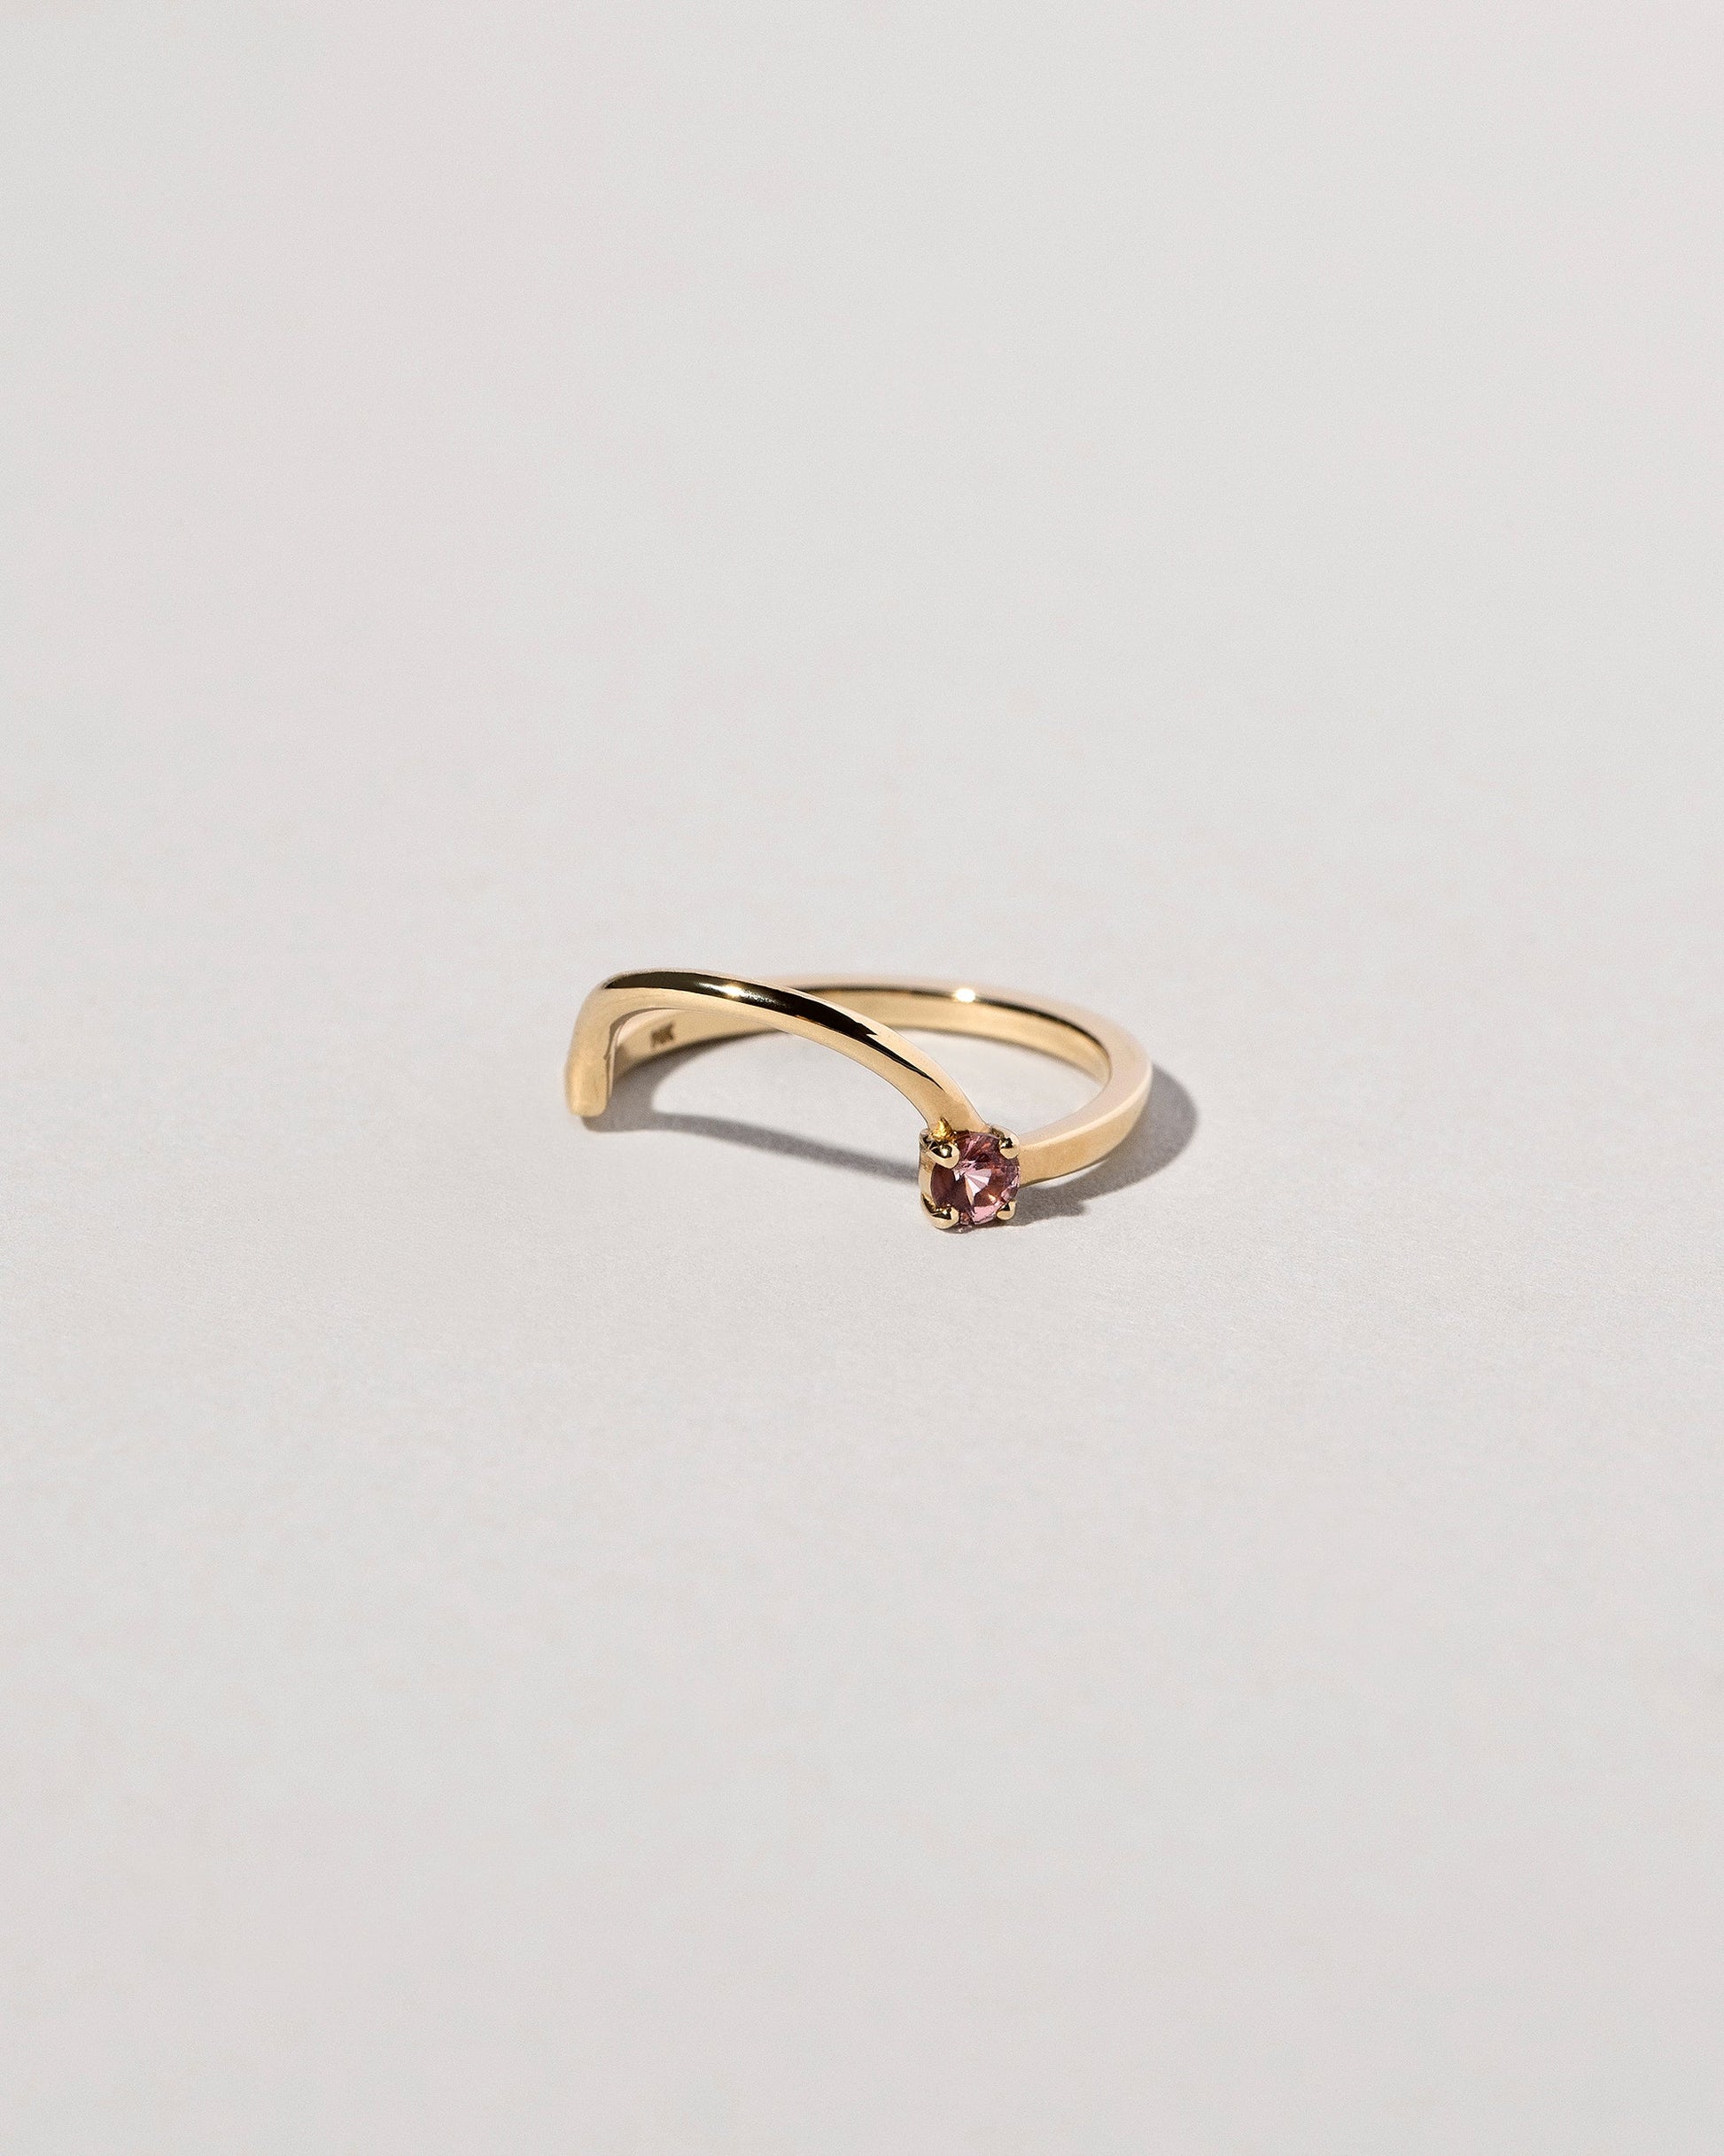 View from the side of the Yellow Gold Spinel Half Hoop Band on light color background.